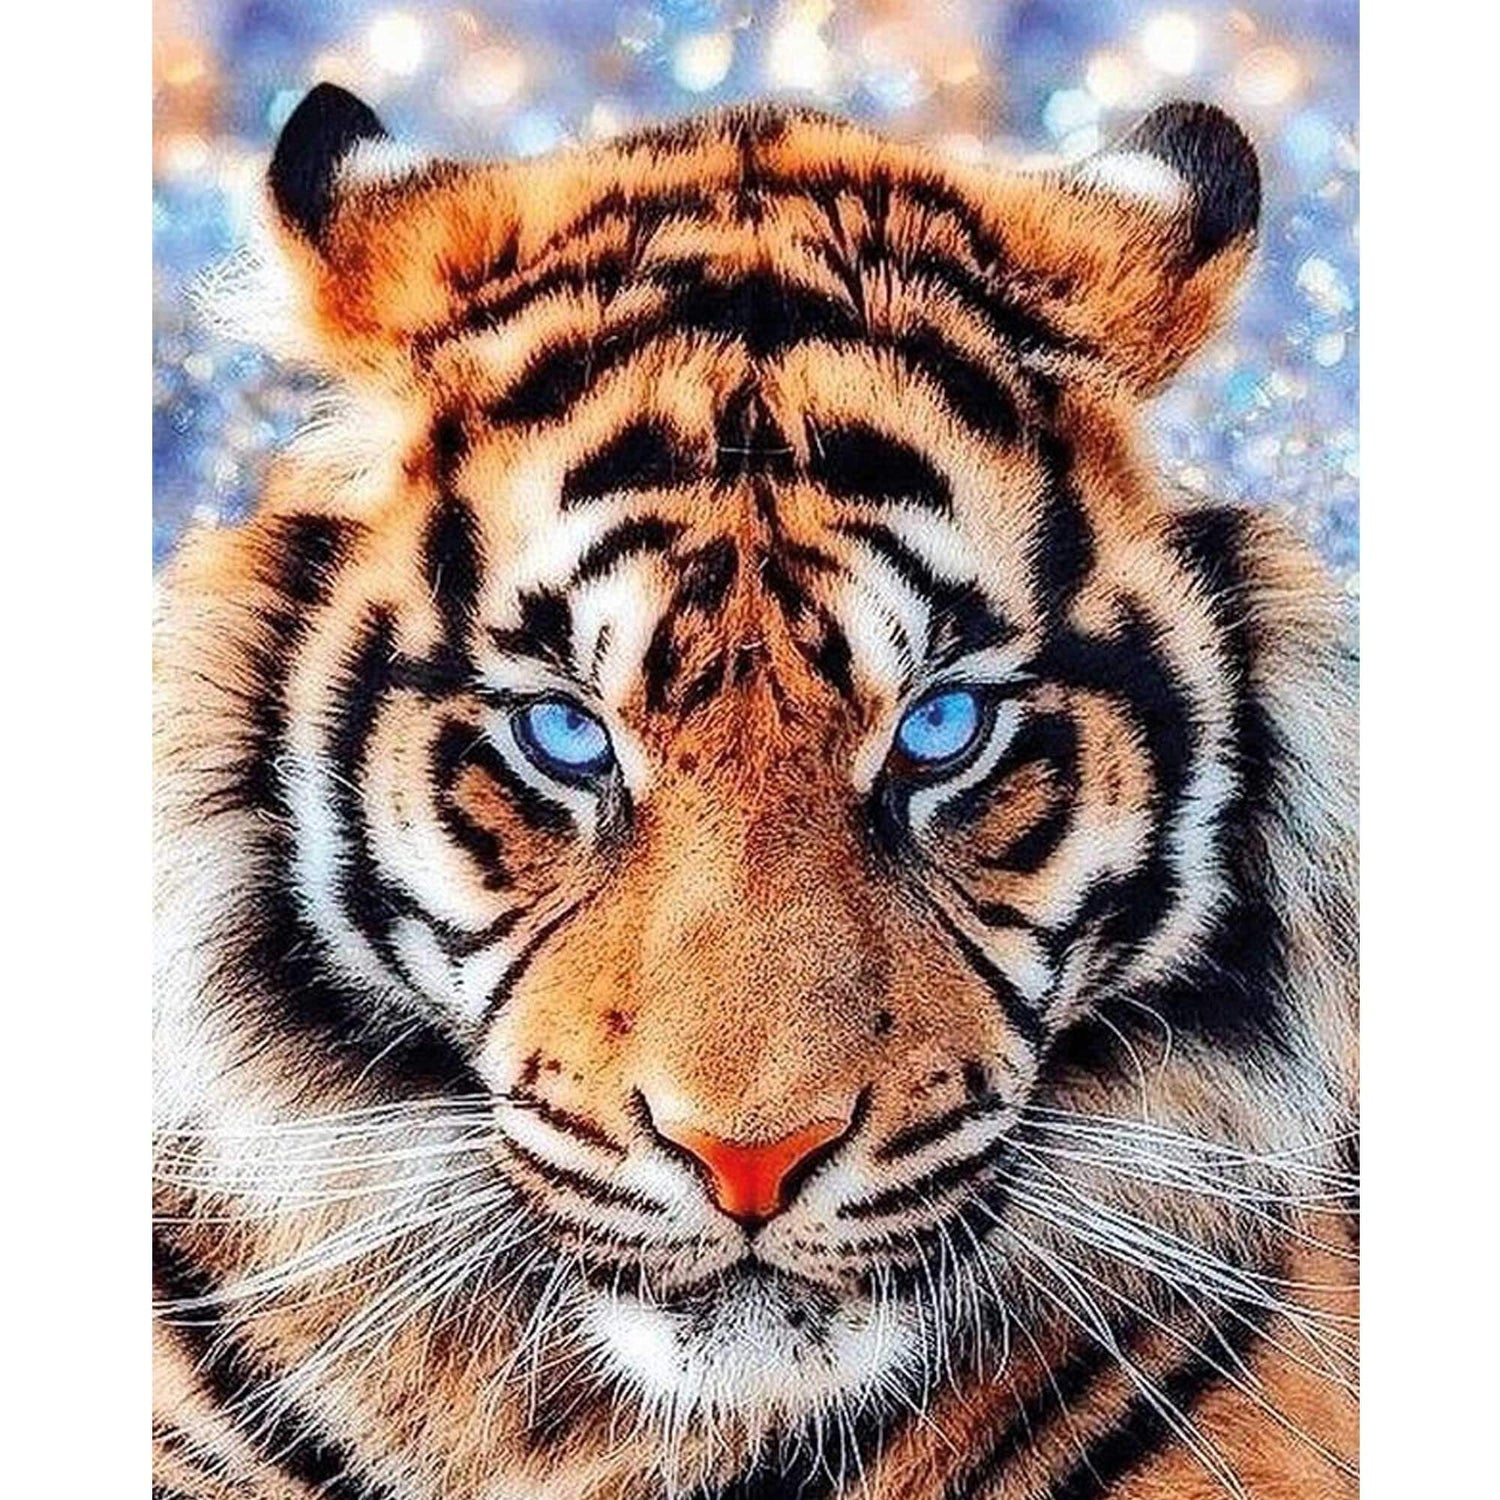 Diamond painting - LG297e - The Look of Tiger Image 1